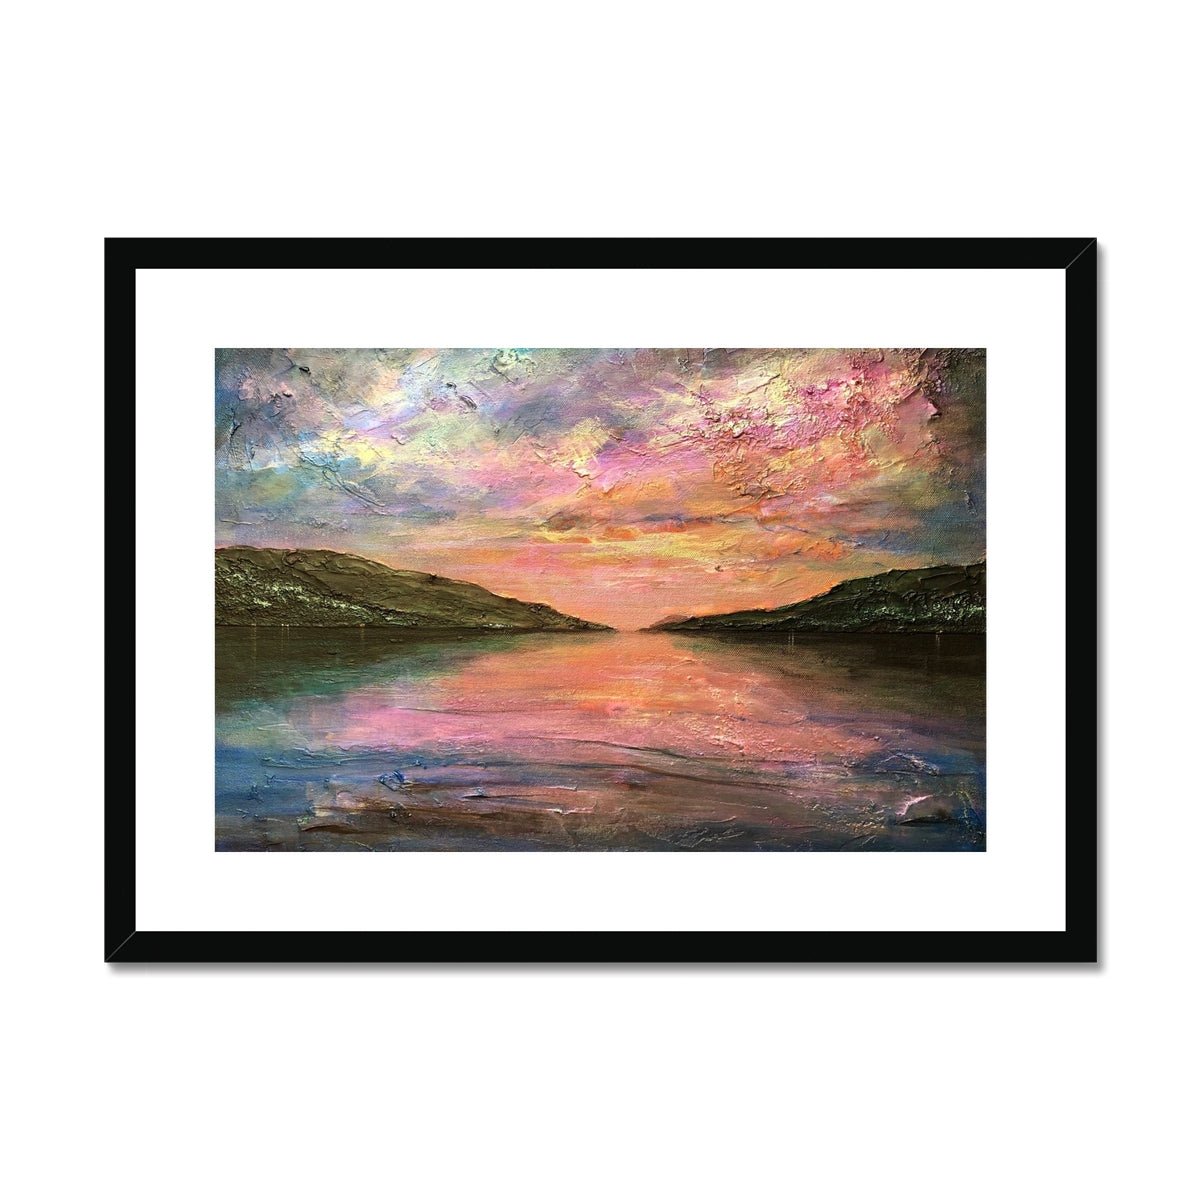 Loch Ness Dawn Painting | Framed & Mounted Prints From Scotland-Framed & Mounted Prints-Scottish Lochs & Mountains Art Gallery-A2 Landscape-Black Frame-Paintings, Prints, Homeware, Art Gifts From Scotland By Scottish Artist Kevin Hunter